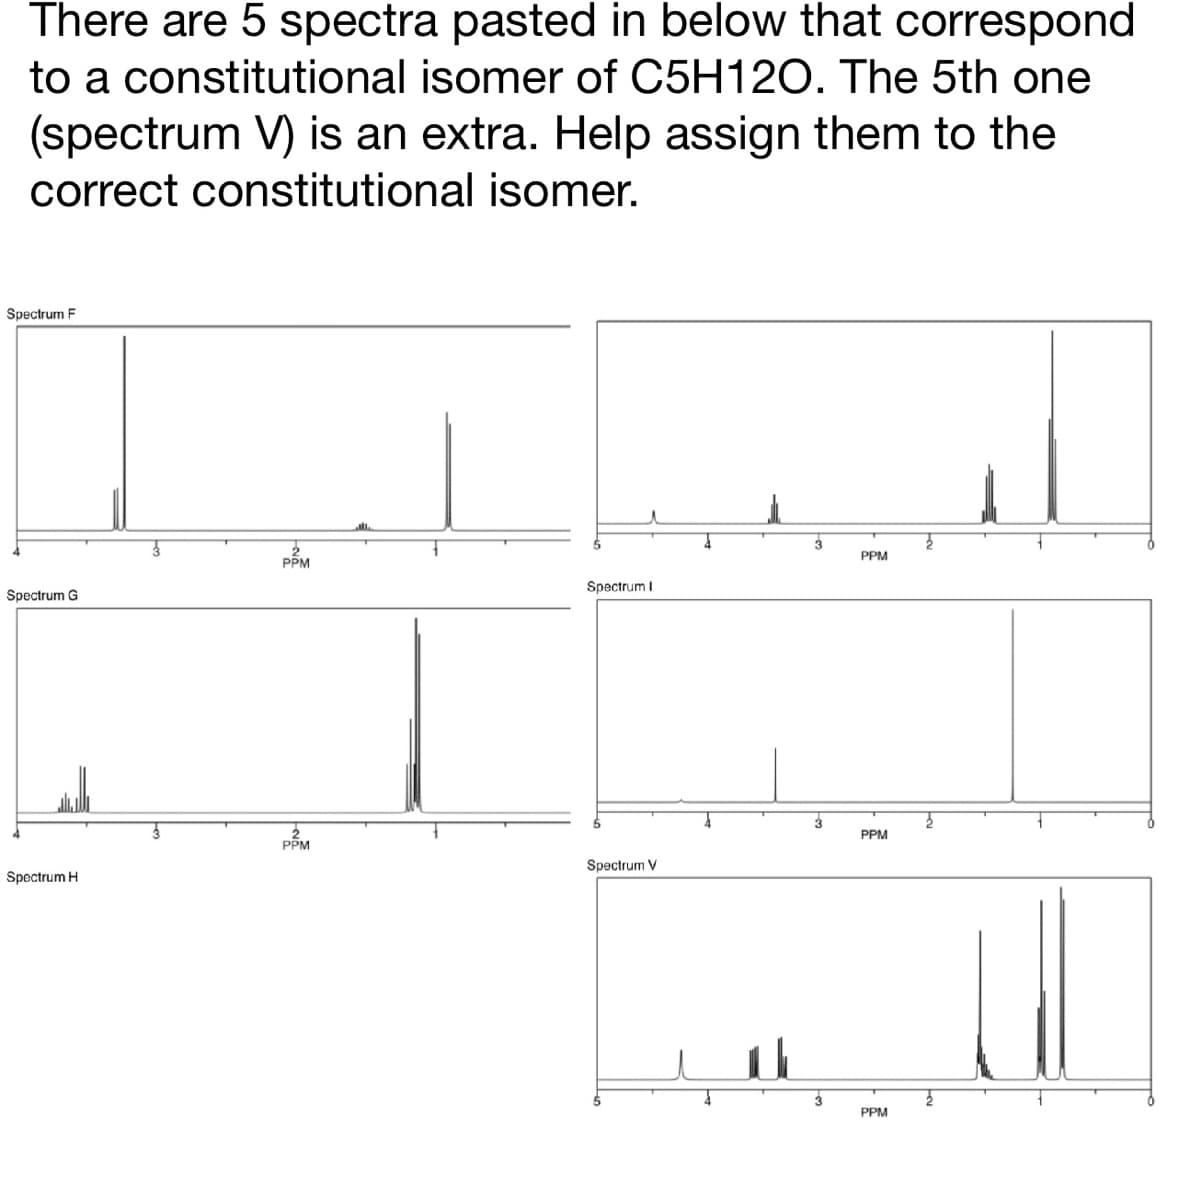 There are 5 spectra pasted in below that correspond
to a constitutional isomer of C5H12O. The 5th one
(spectrum V) is an extra. Help assign them to the
correct constitutional
isomer.
Spectrum F
Spectrum G
Spectrum Hi
PPM
PPM
Spectrum I
Spectrum V
3
3
3
PPM
PPM
PPM